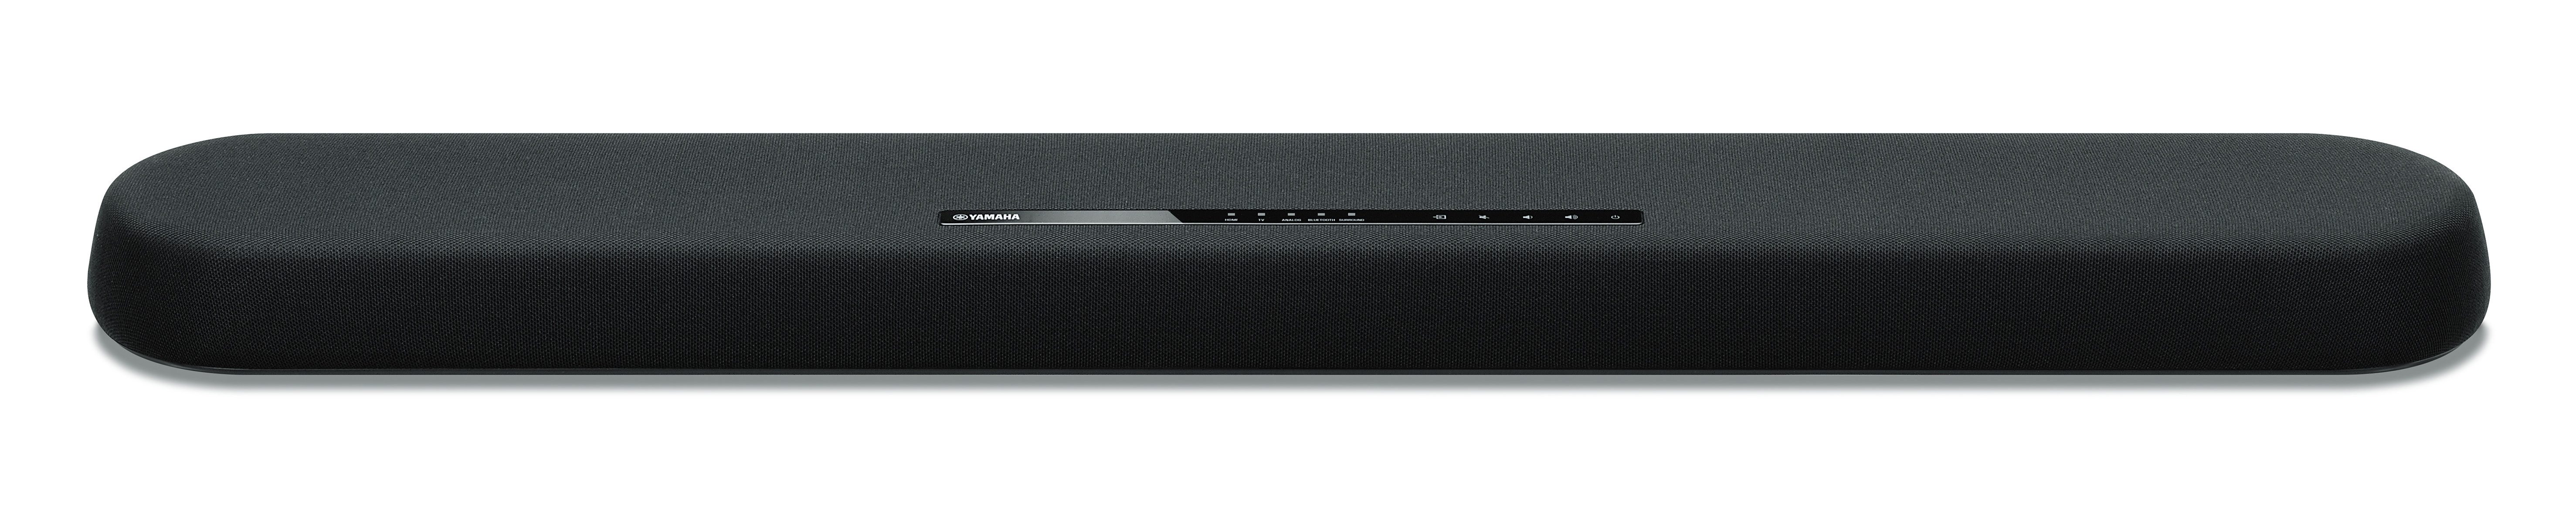 YAS-108 - Overview - Sound Bars - Audio & Visual - Products 